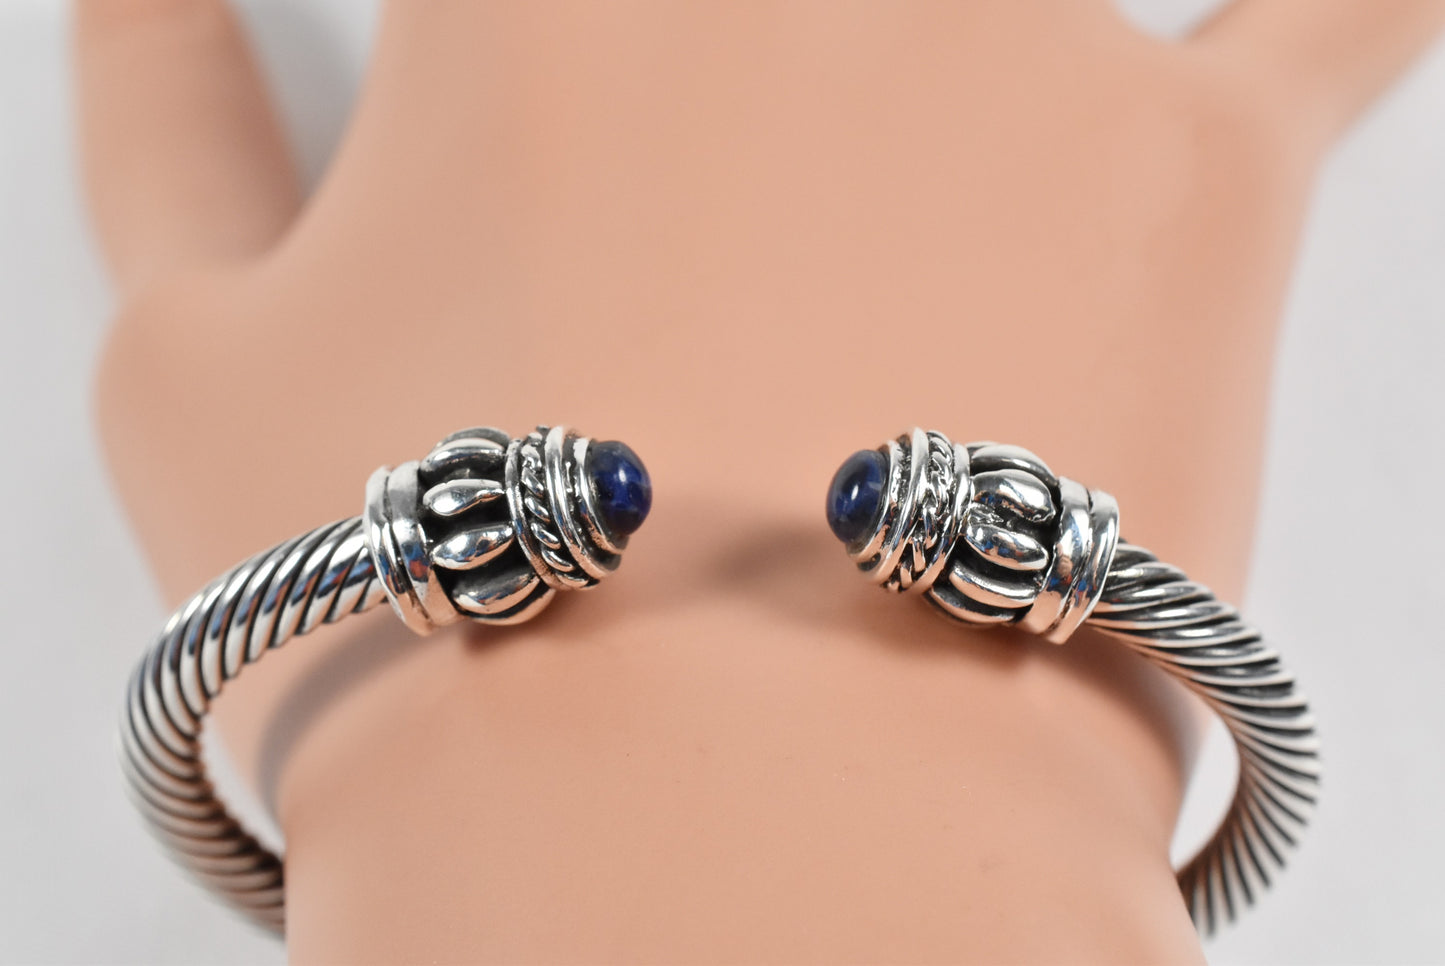 Sterling Silver Lapis Lazuli Cable Cuff Bracelet, 7 inches - 34.6g